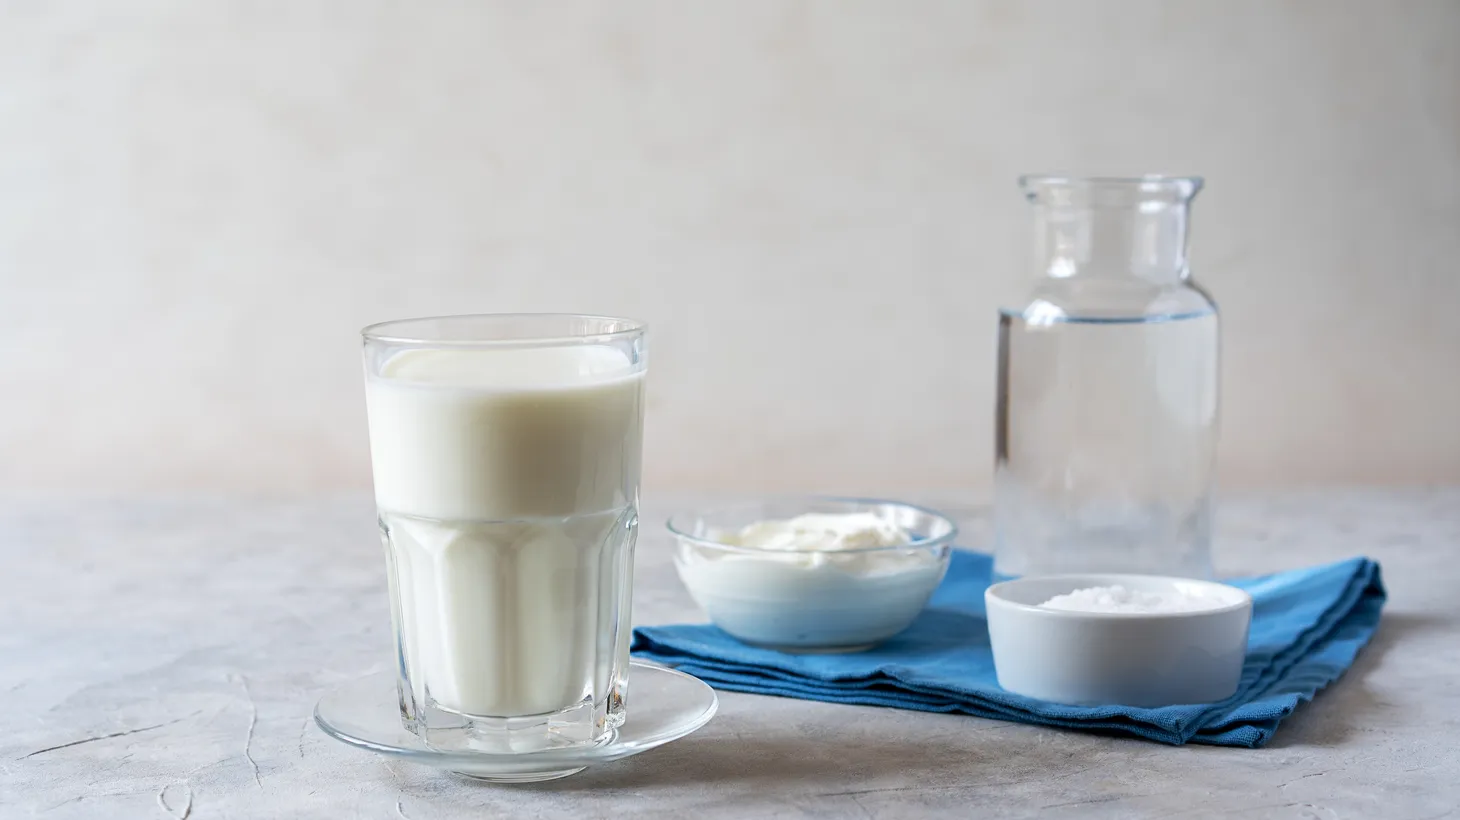 The perfect summer go-to drink is ayran, made of three simple ingredients: yogurt, water, and salt.